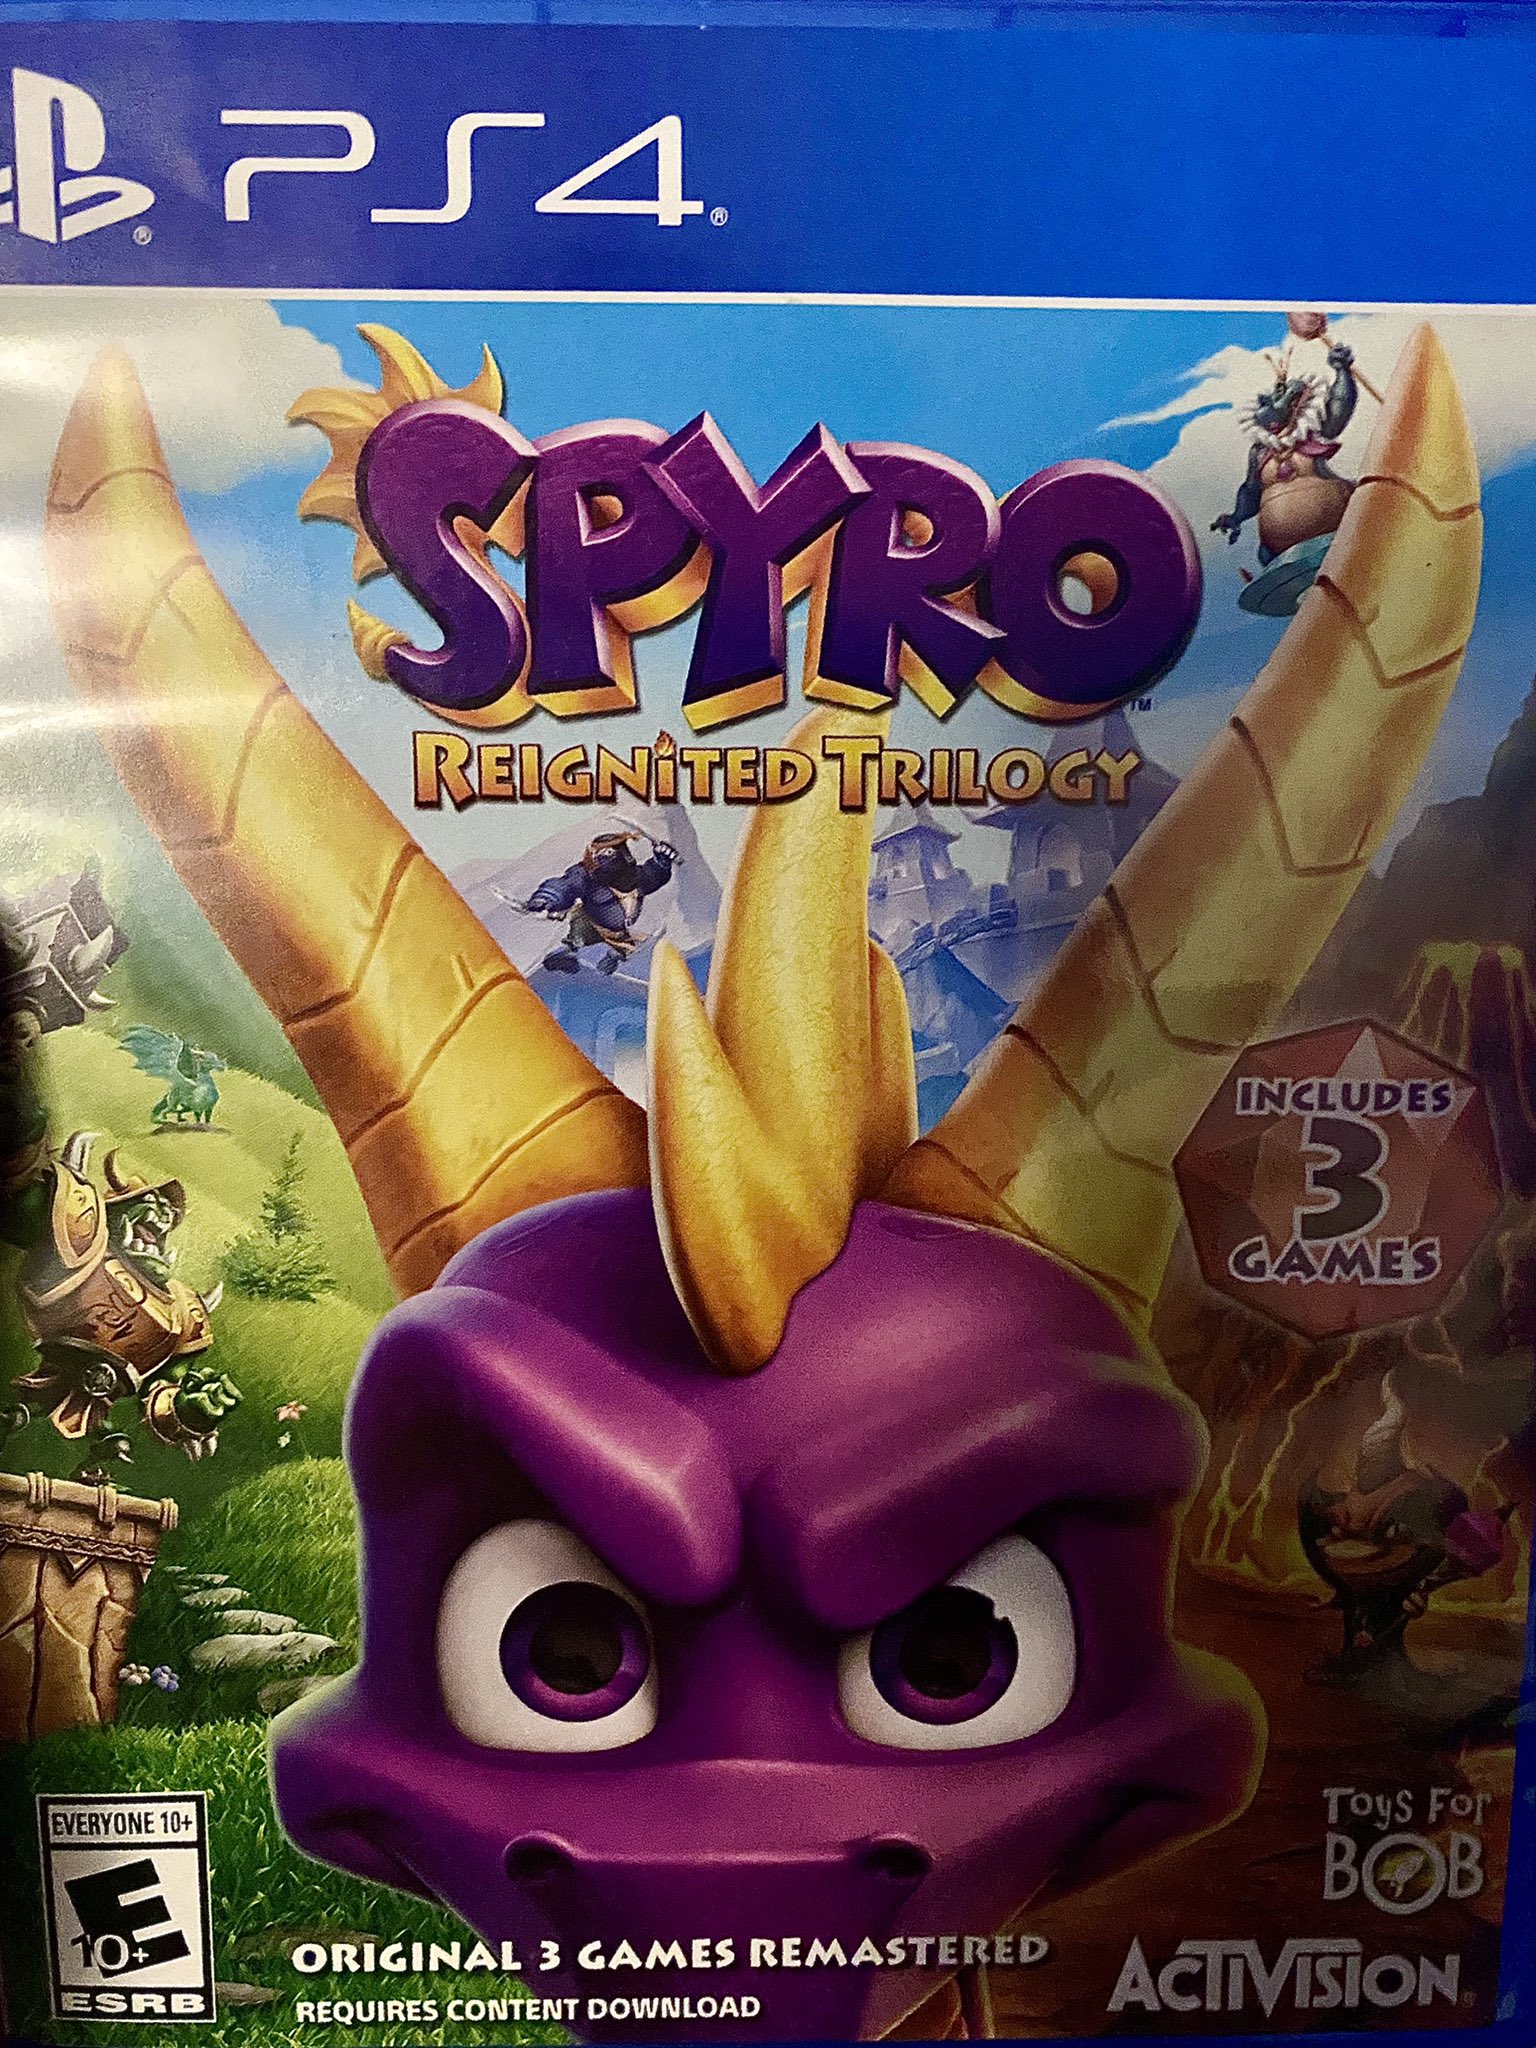 Josh 🎮 on Twitter: "Managed to pick up something special. No this isn't an of Spyro Reignited Trilogy on PS4. This here is the reissue that comes with